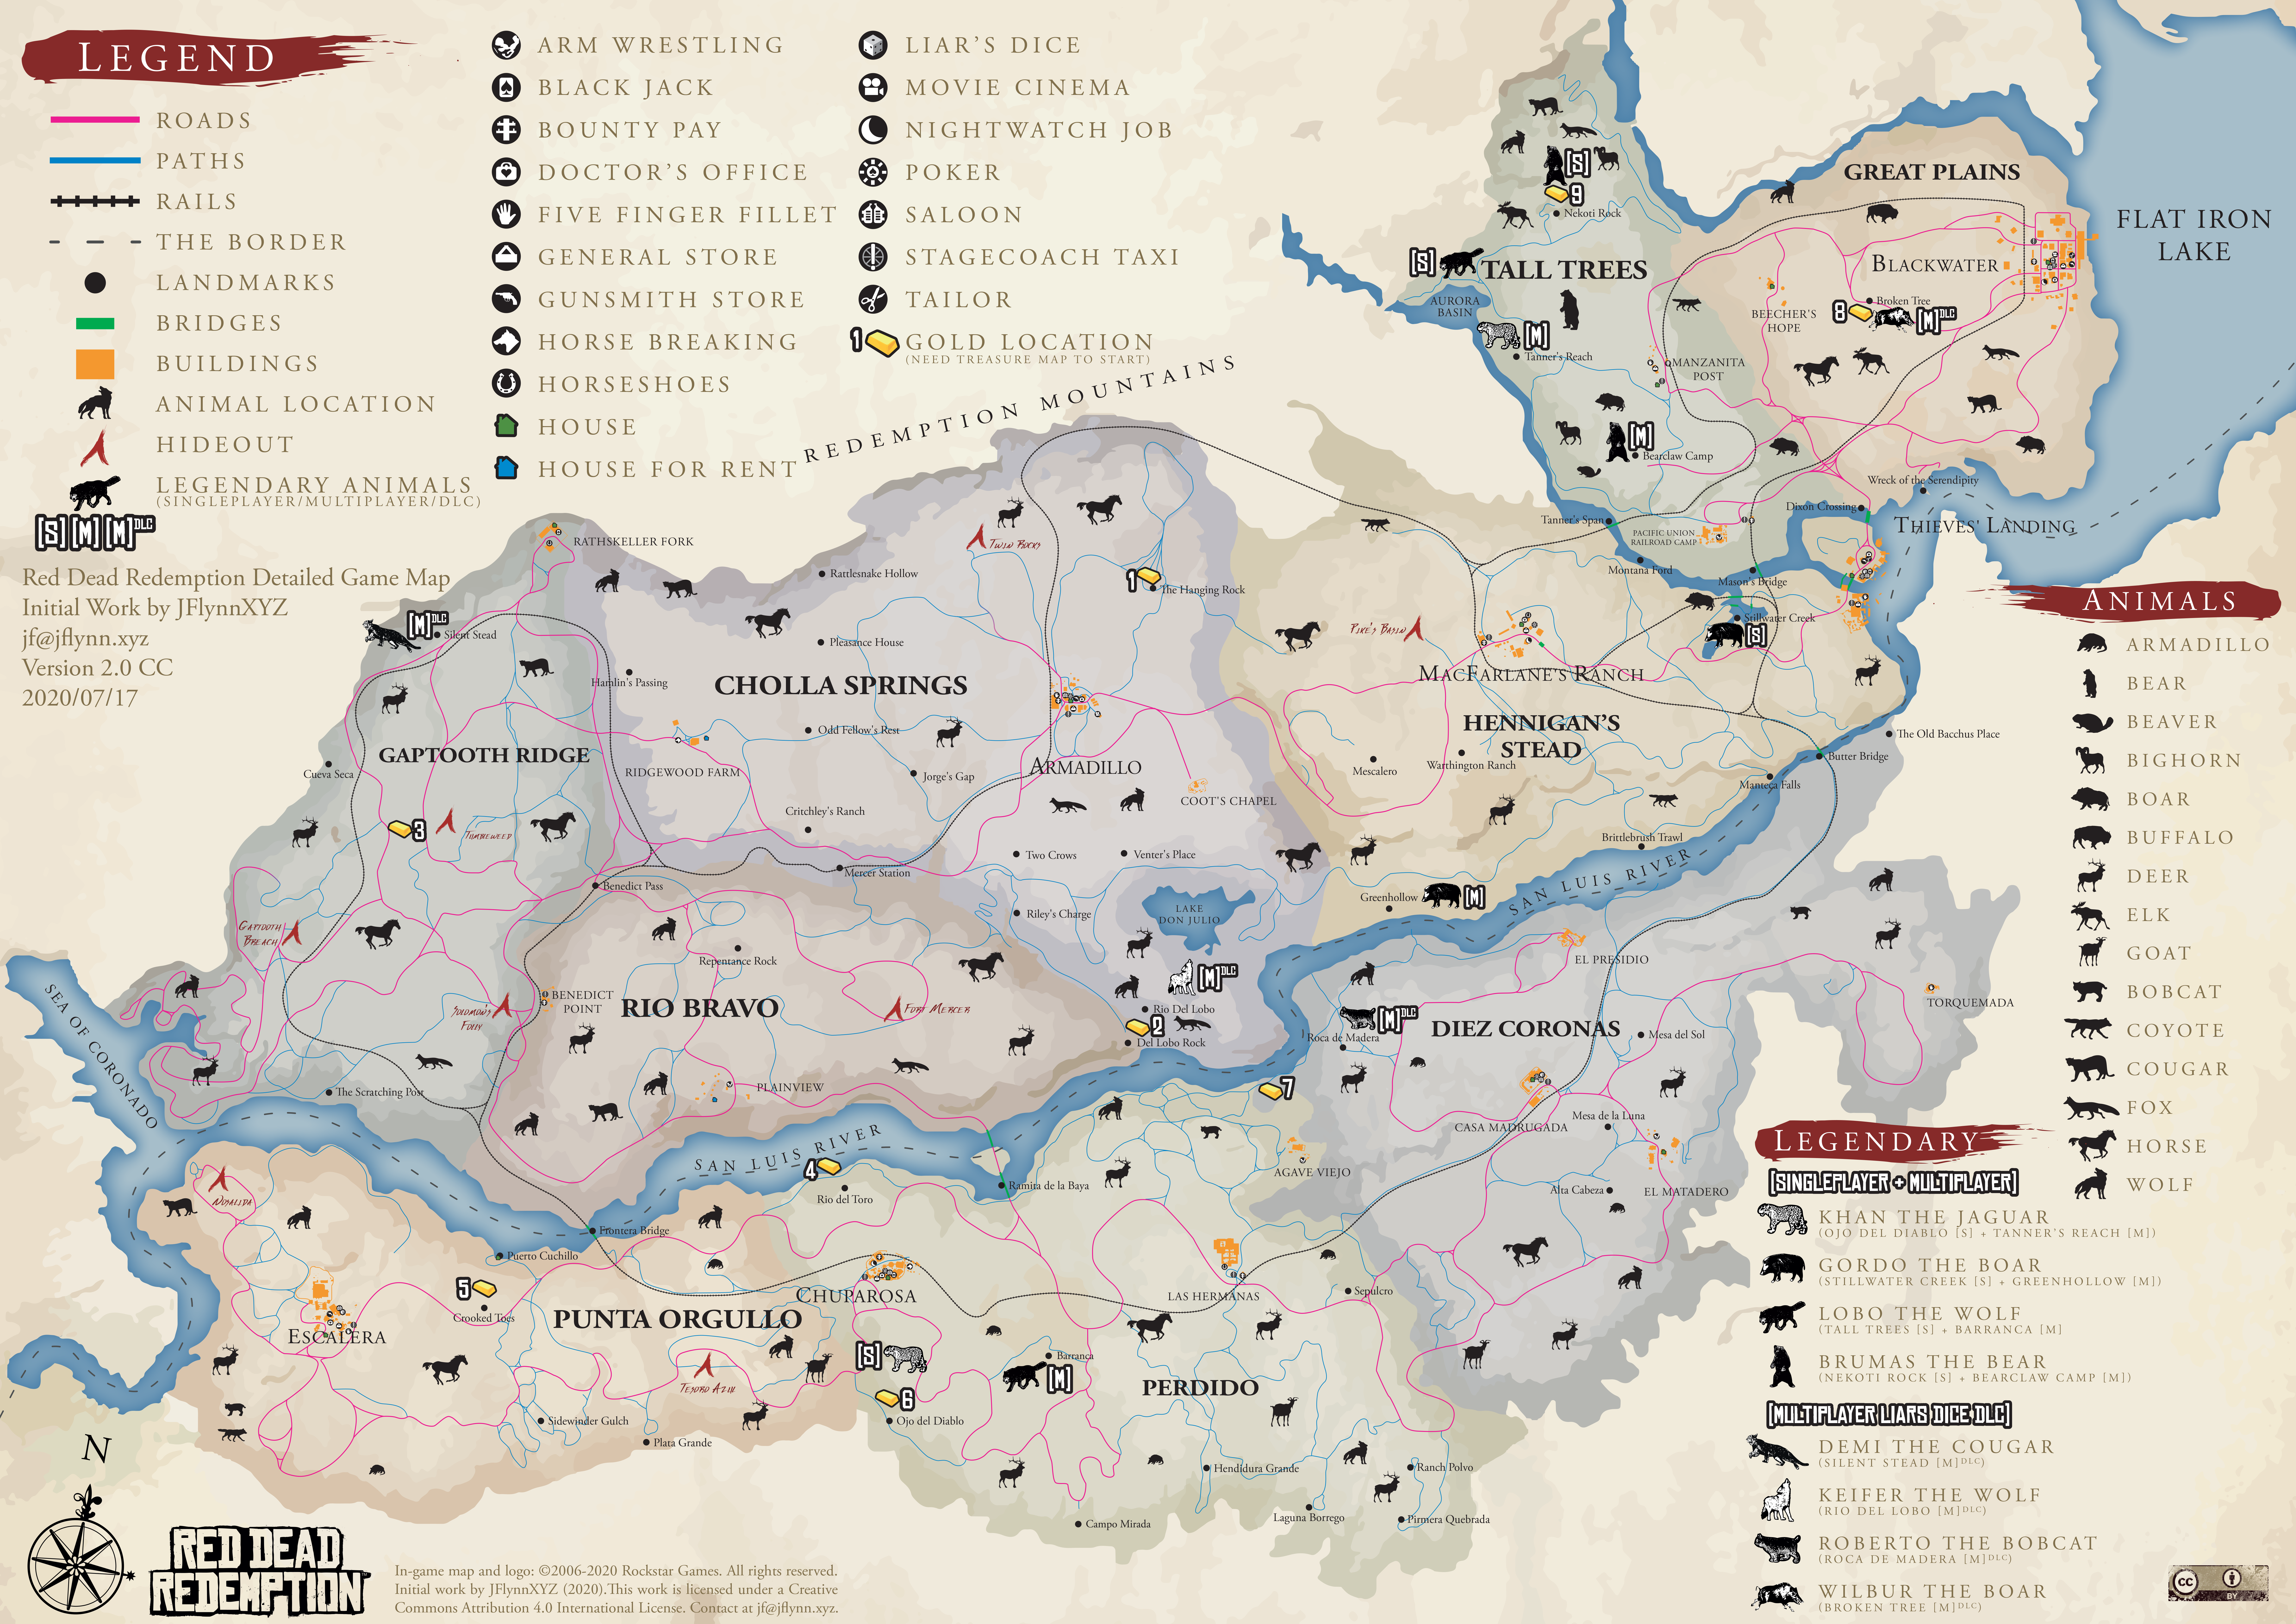 Red Dead Online Map - View the Full RDR2 Online Map - GameRevolution